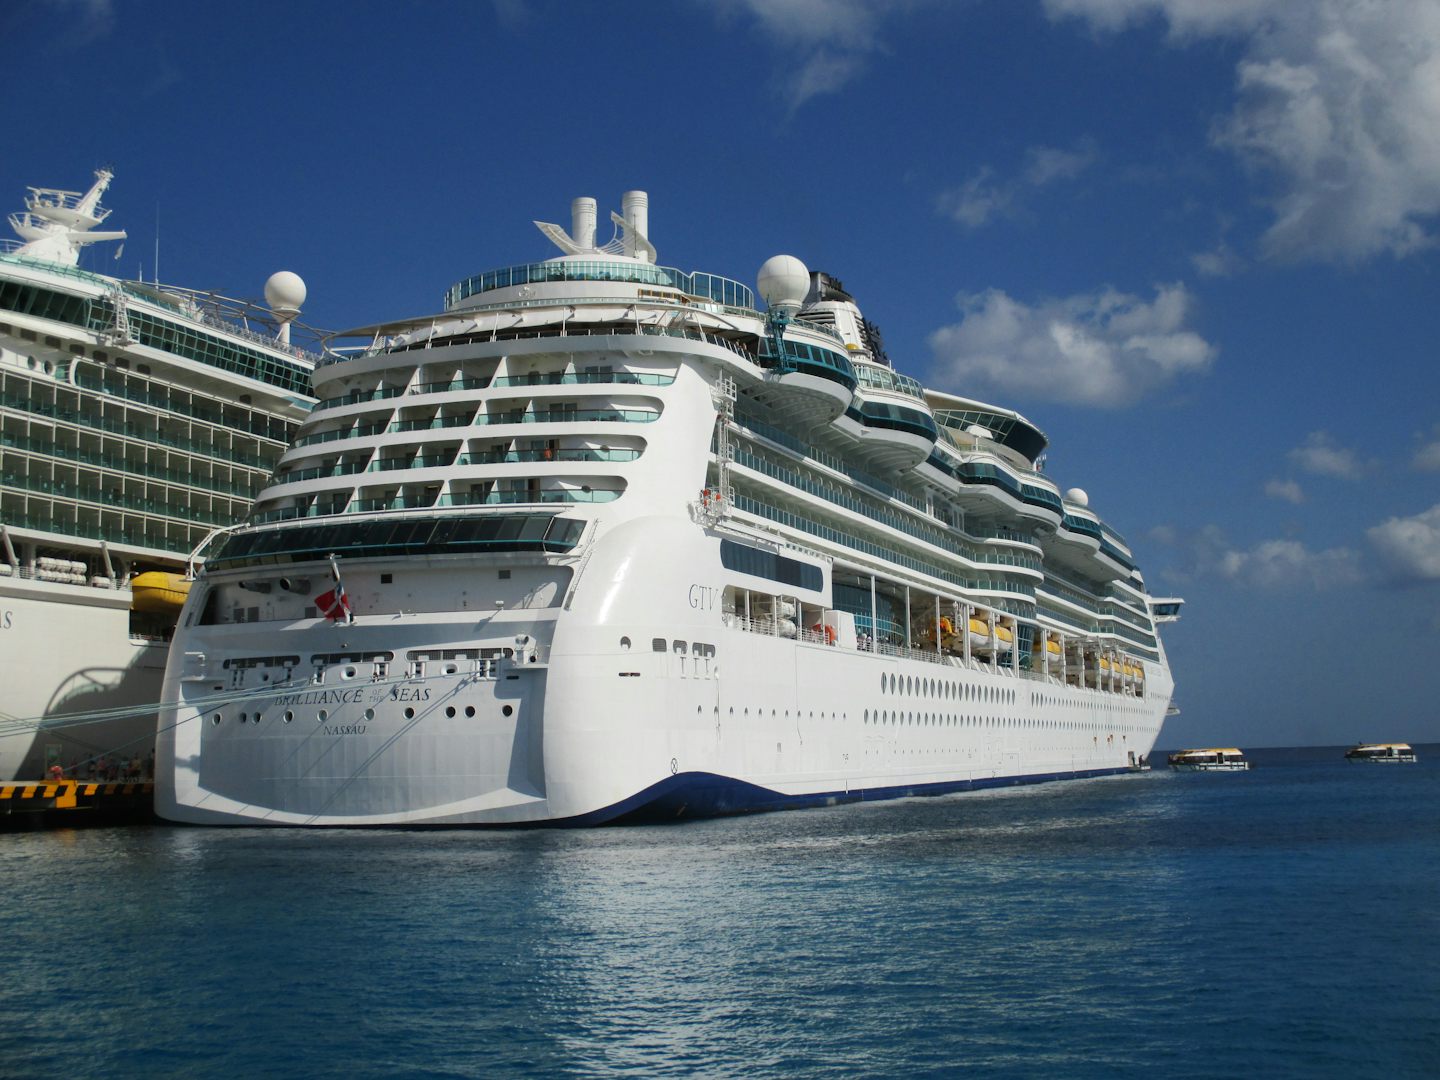 Brilliance of the Seas parked at Cozumel port. You can see the difference